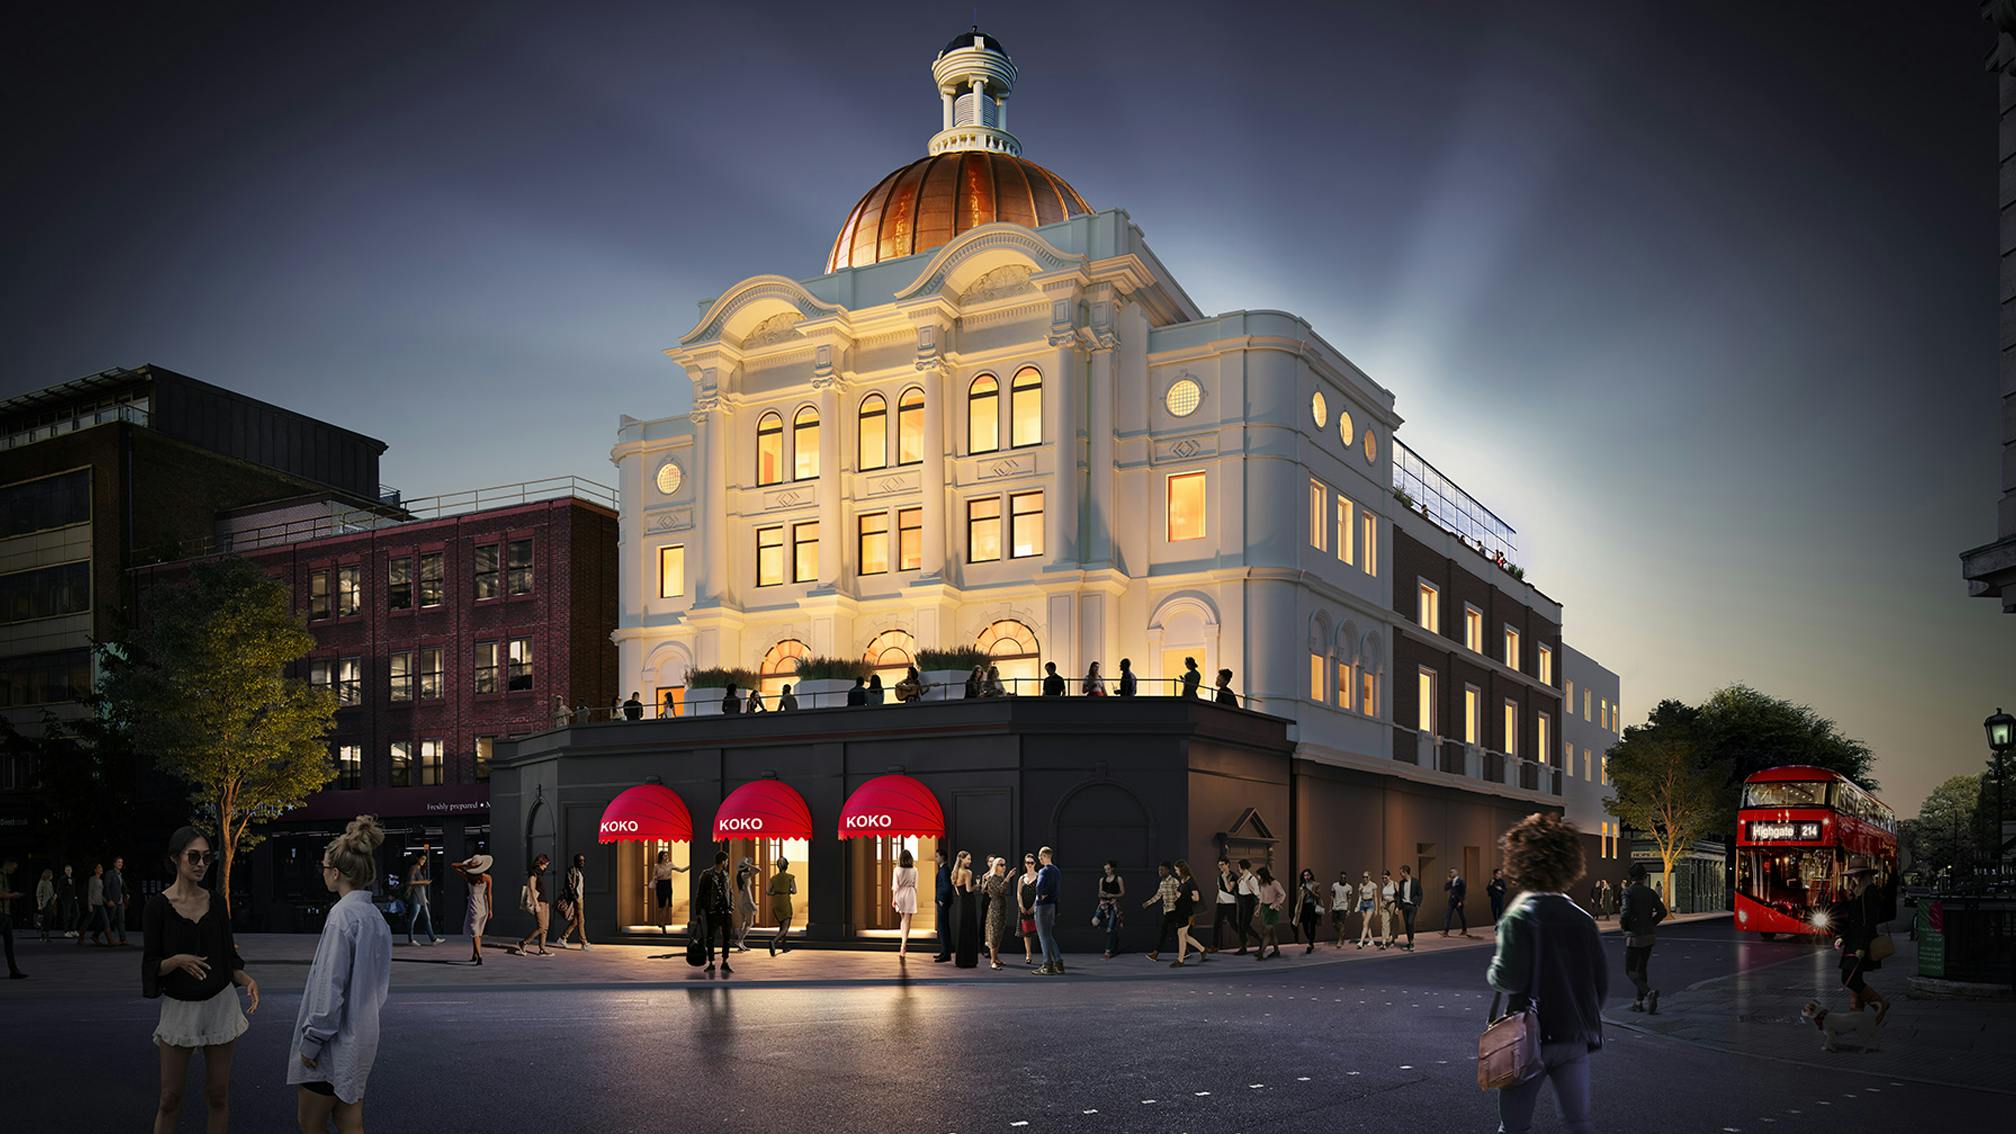 London venue KOKO to relaunch in spring 2022 after £70m of investment